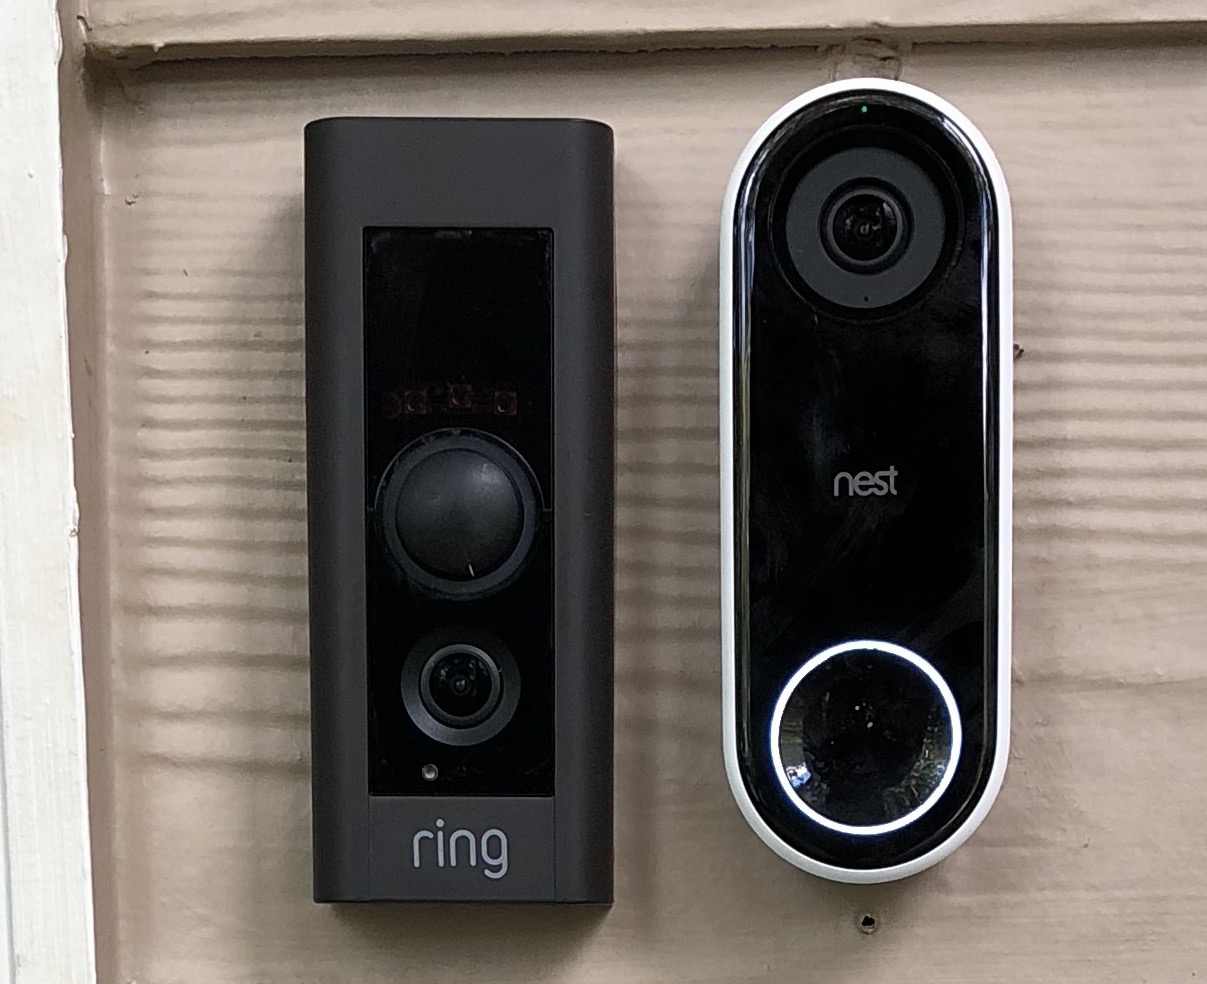 teugels Calamiteit Stiptheid My Ring vs. Nest Review... P.S. One Destroys the Other